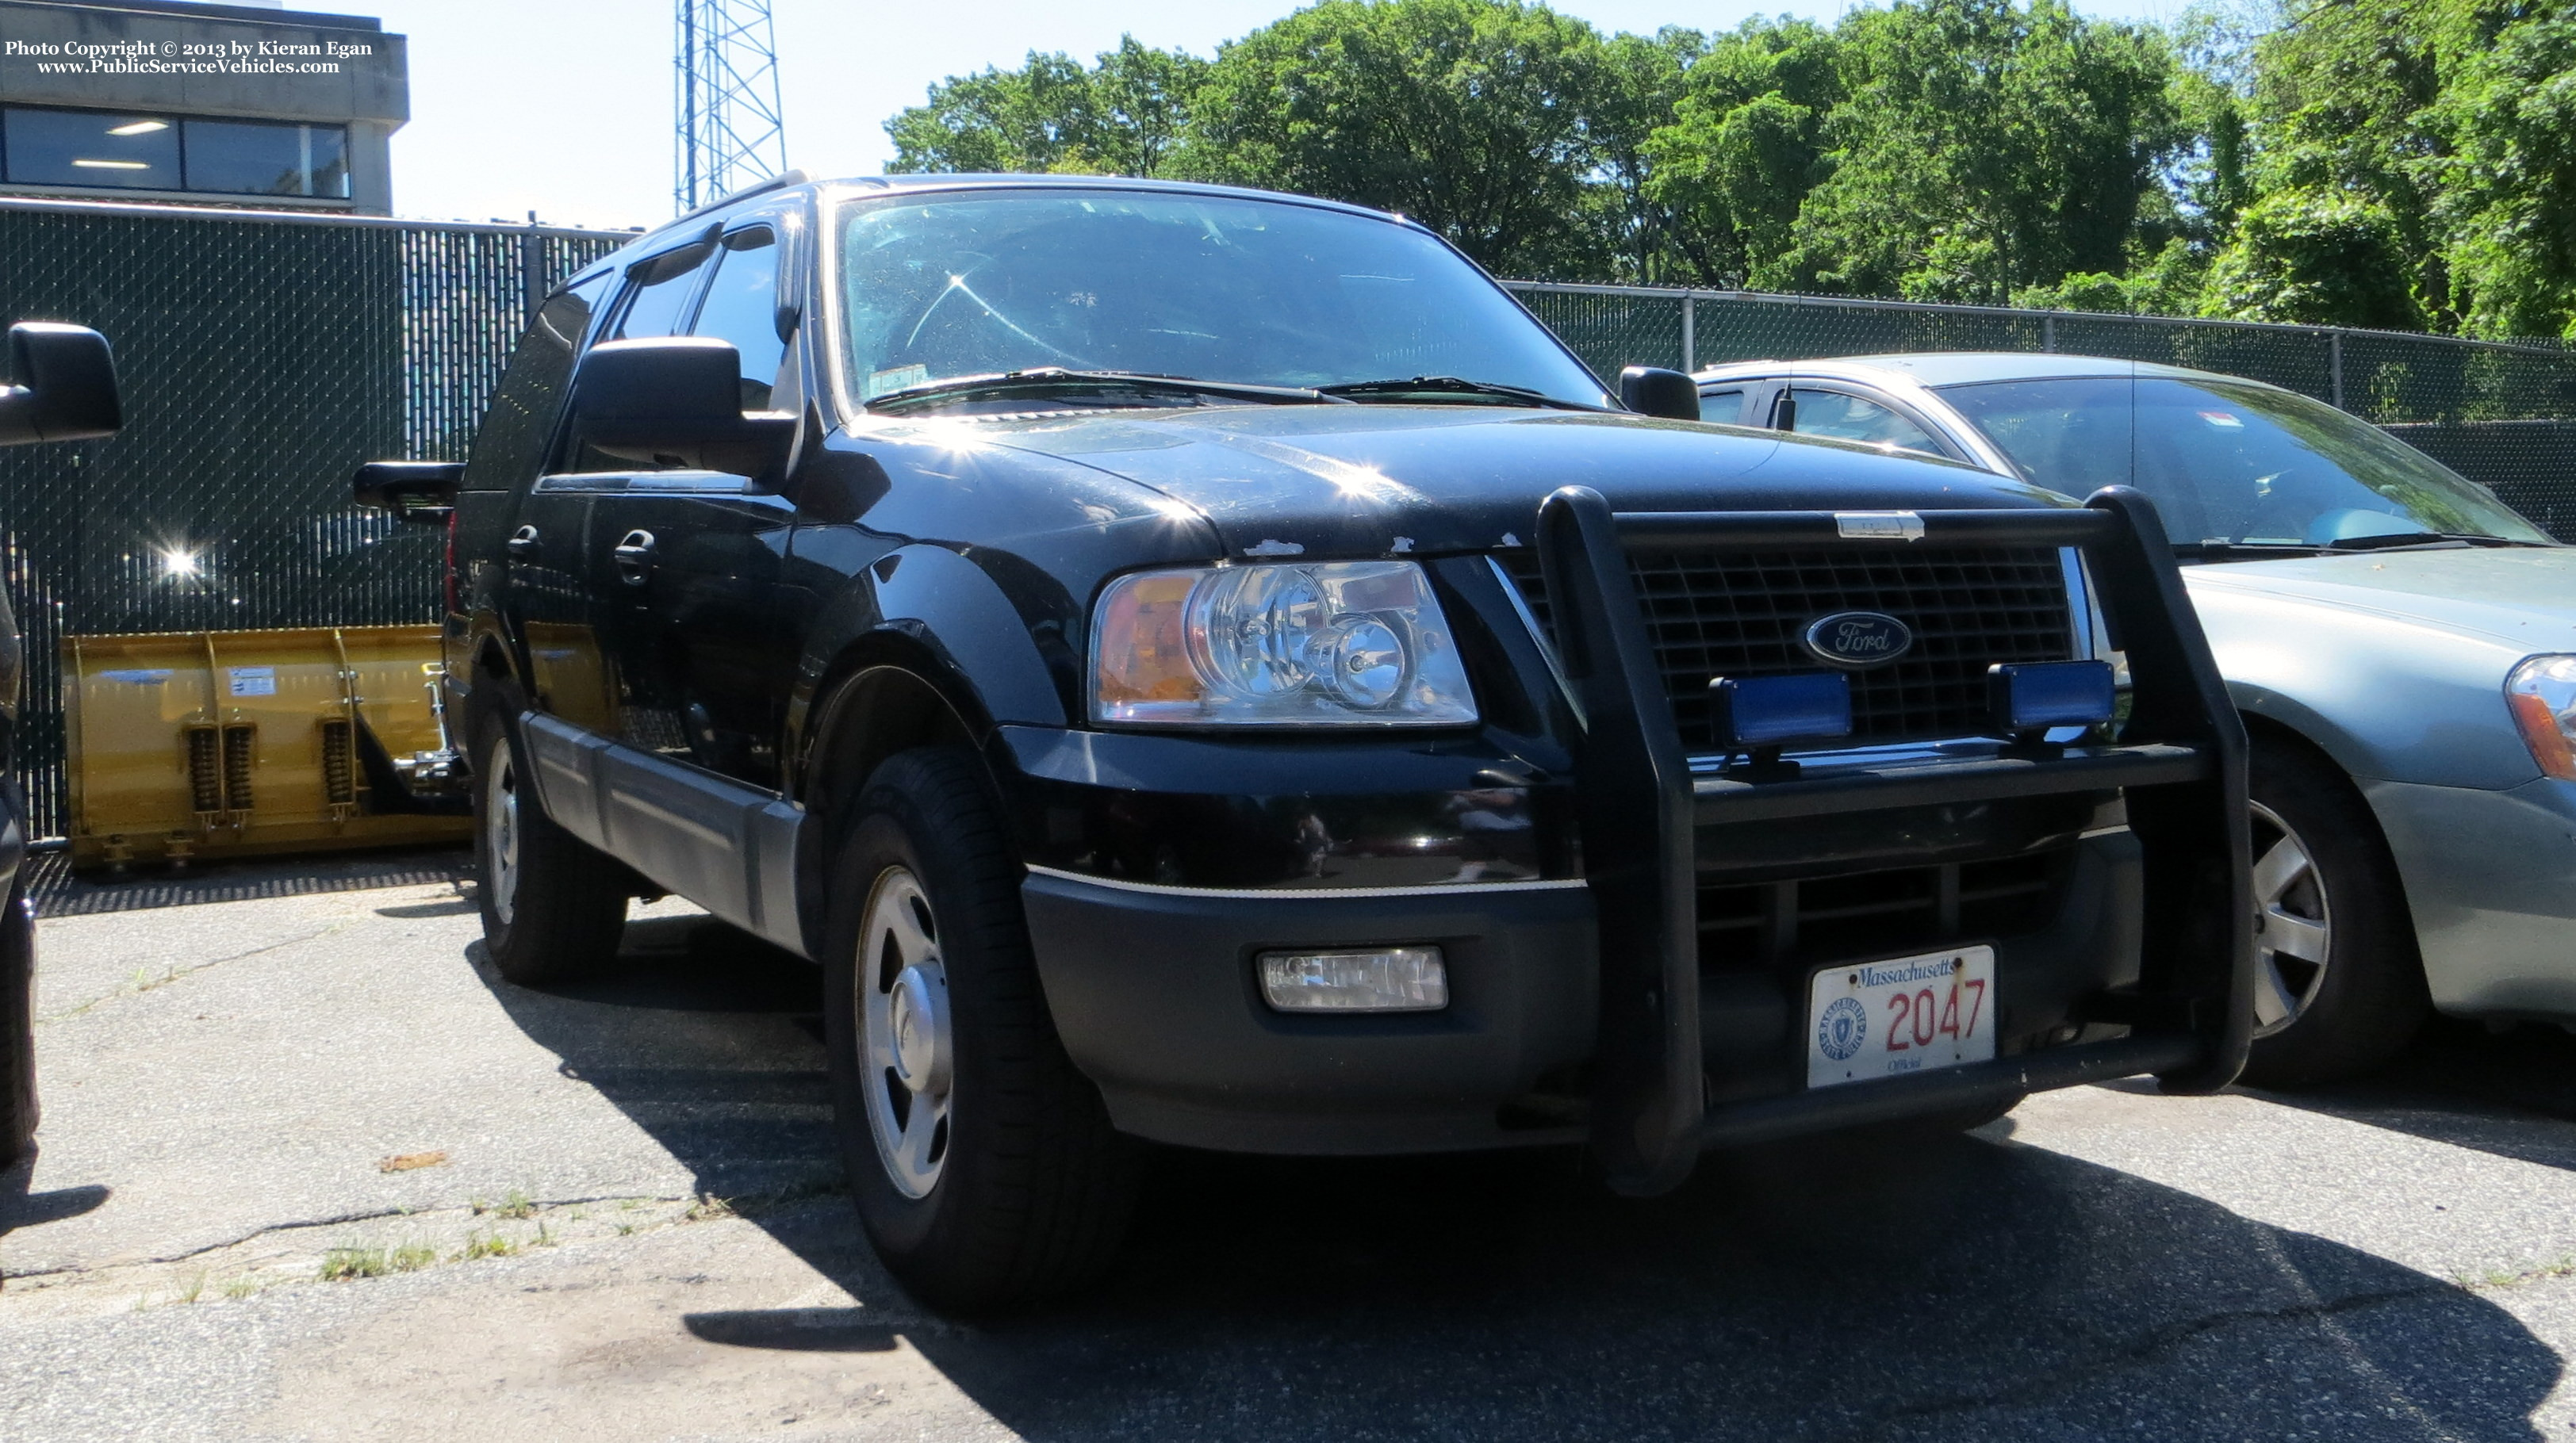 A photo  of Massachusetts State Police
            Cruiser 2047, a 2003-2006 Ford Expedition             taken by Kieran Egan